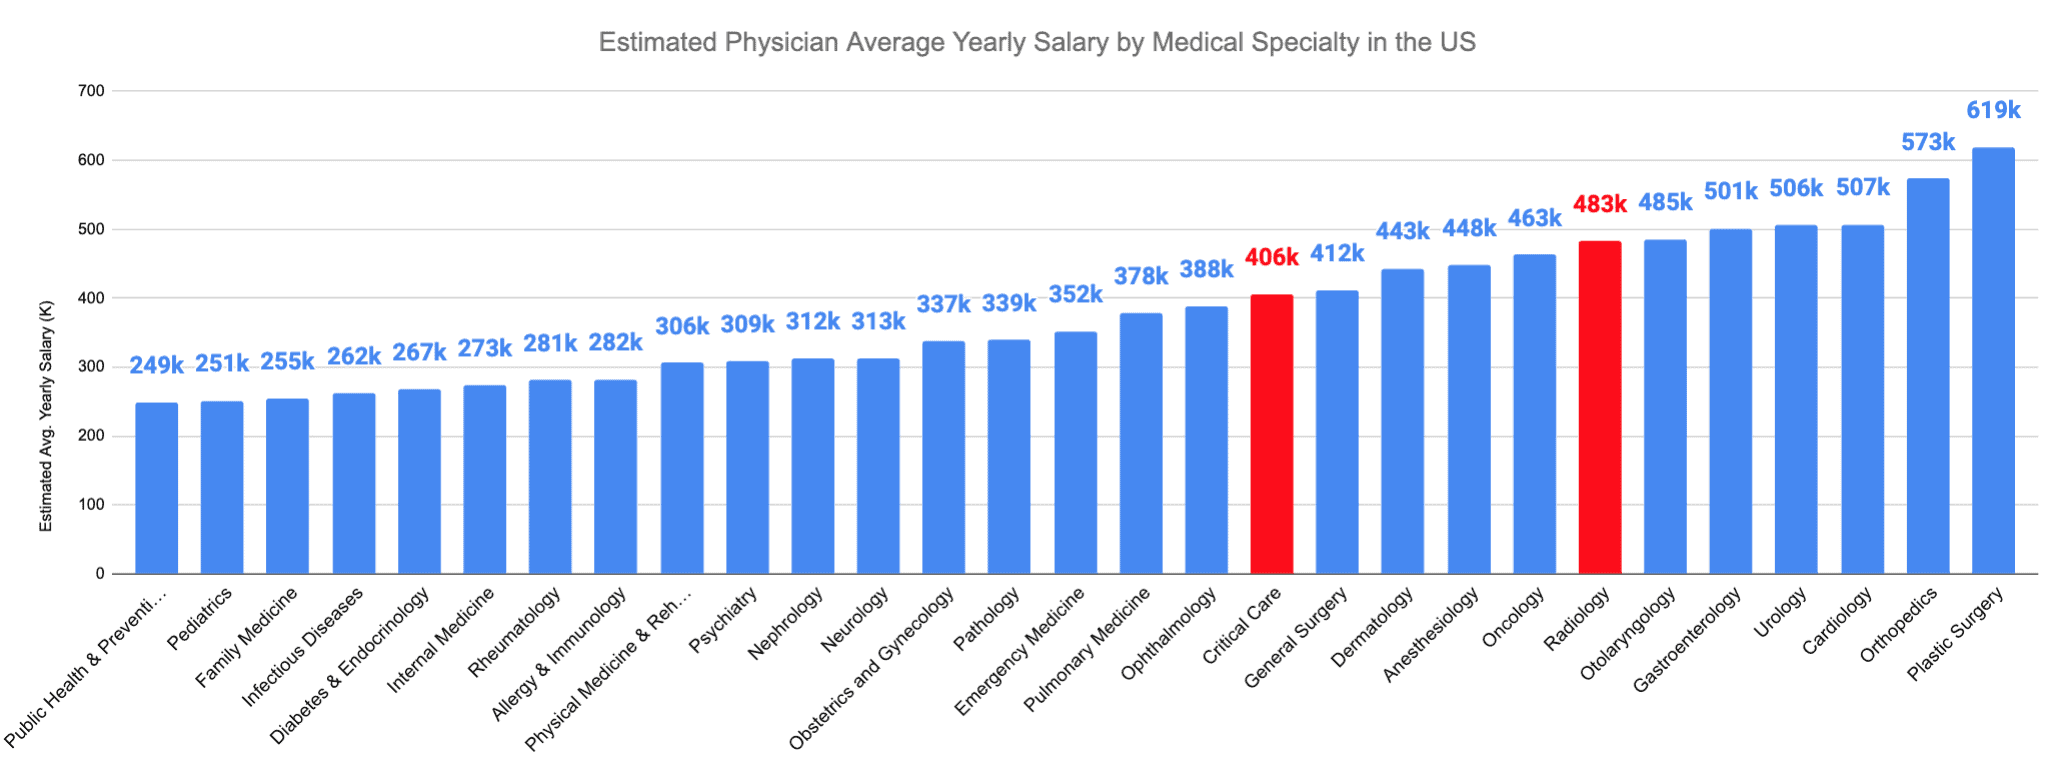 Radiology vs. Critical Care Estimated Physician Average Yearly Salary by Medical Specialty in the US